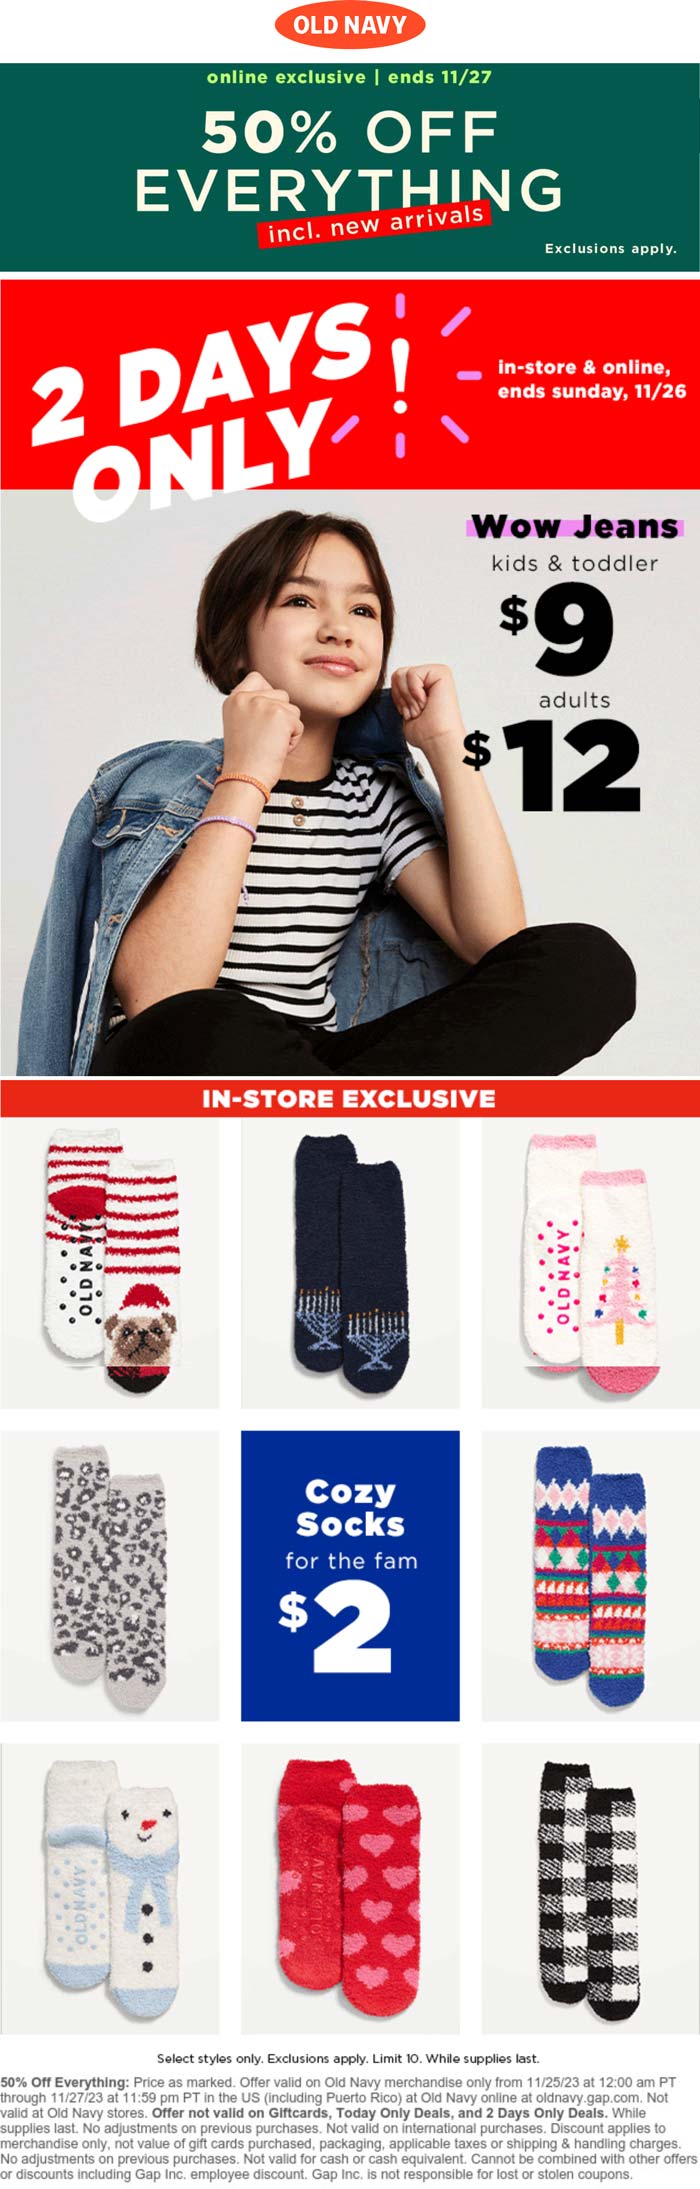 50% off everything at Old Navy #oldnavy